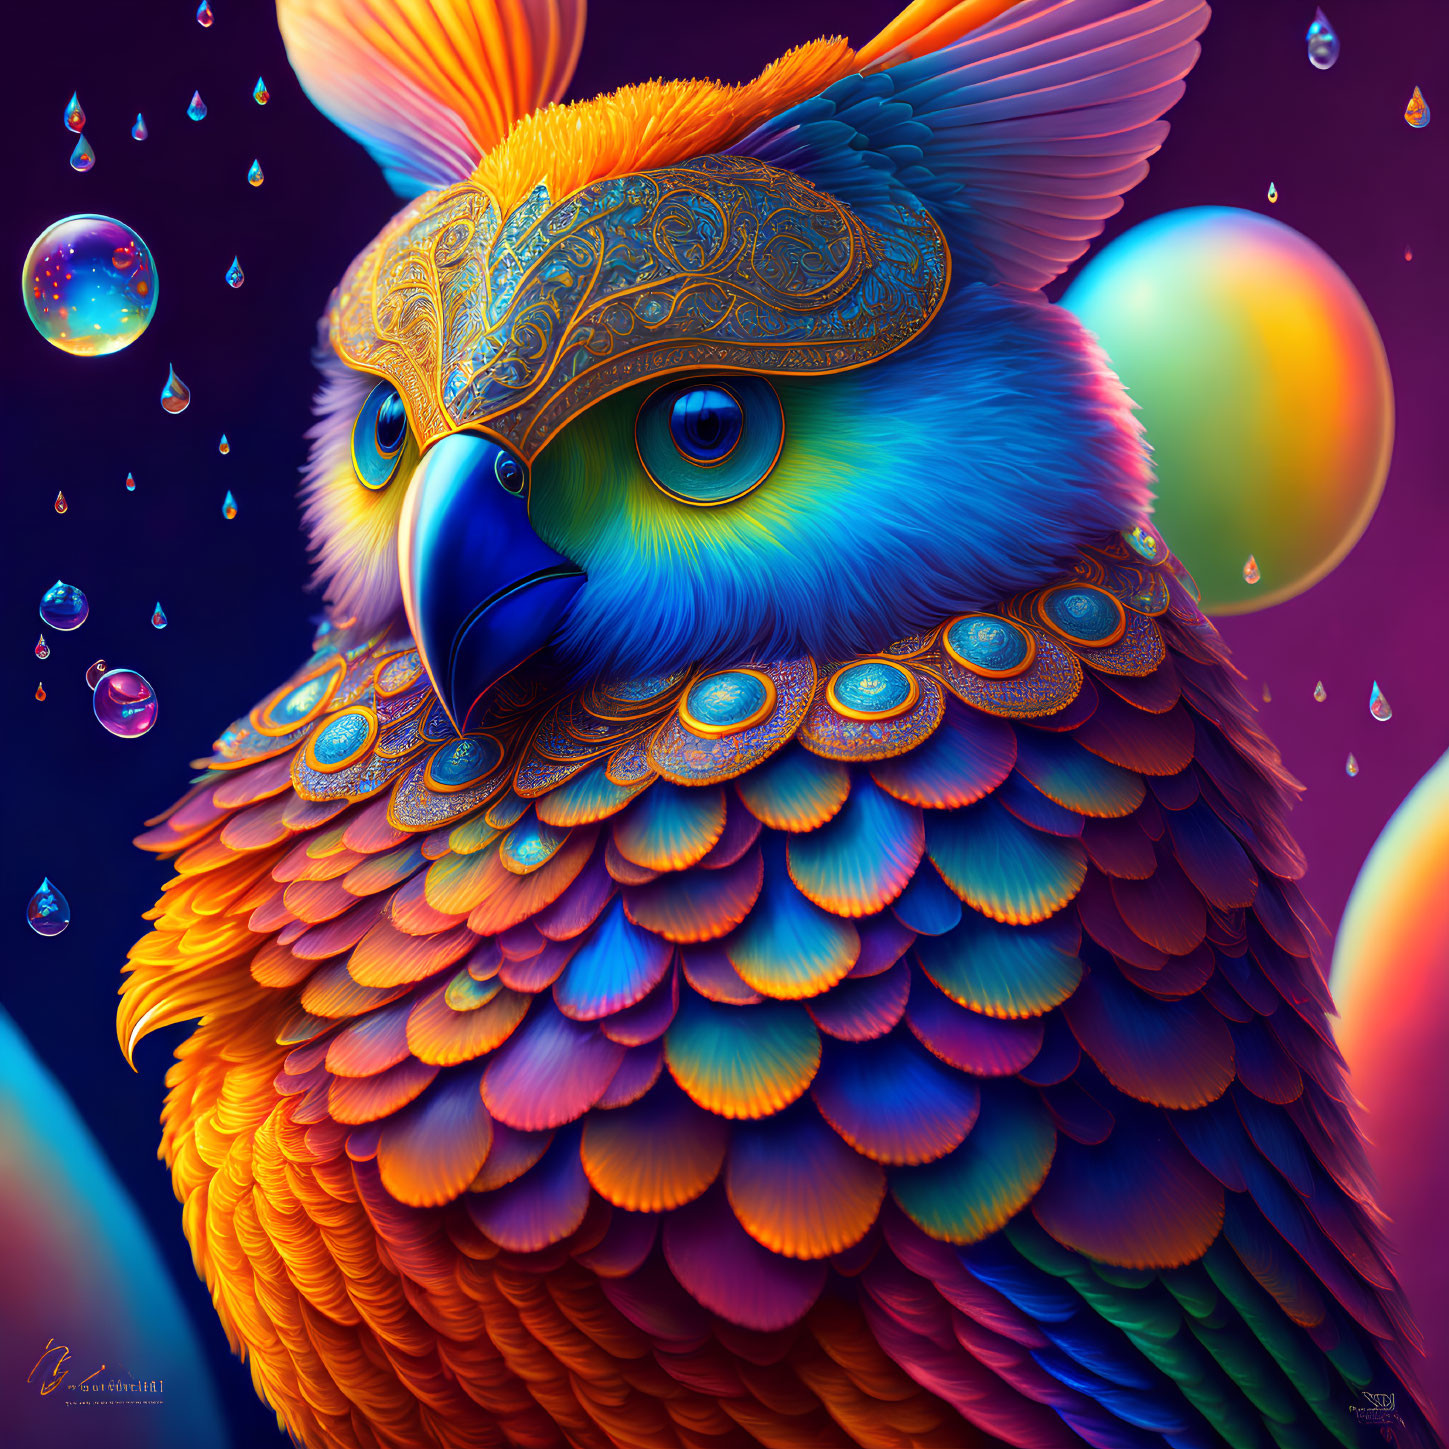 Colorful Owl Illustration with Jewel Tones and Intricate Patterns